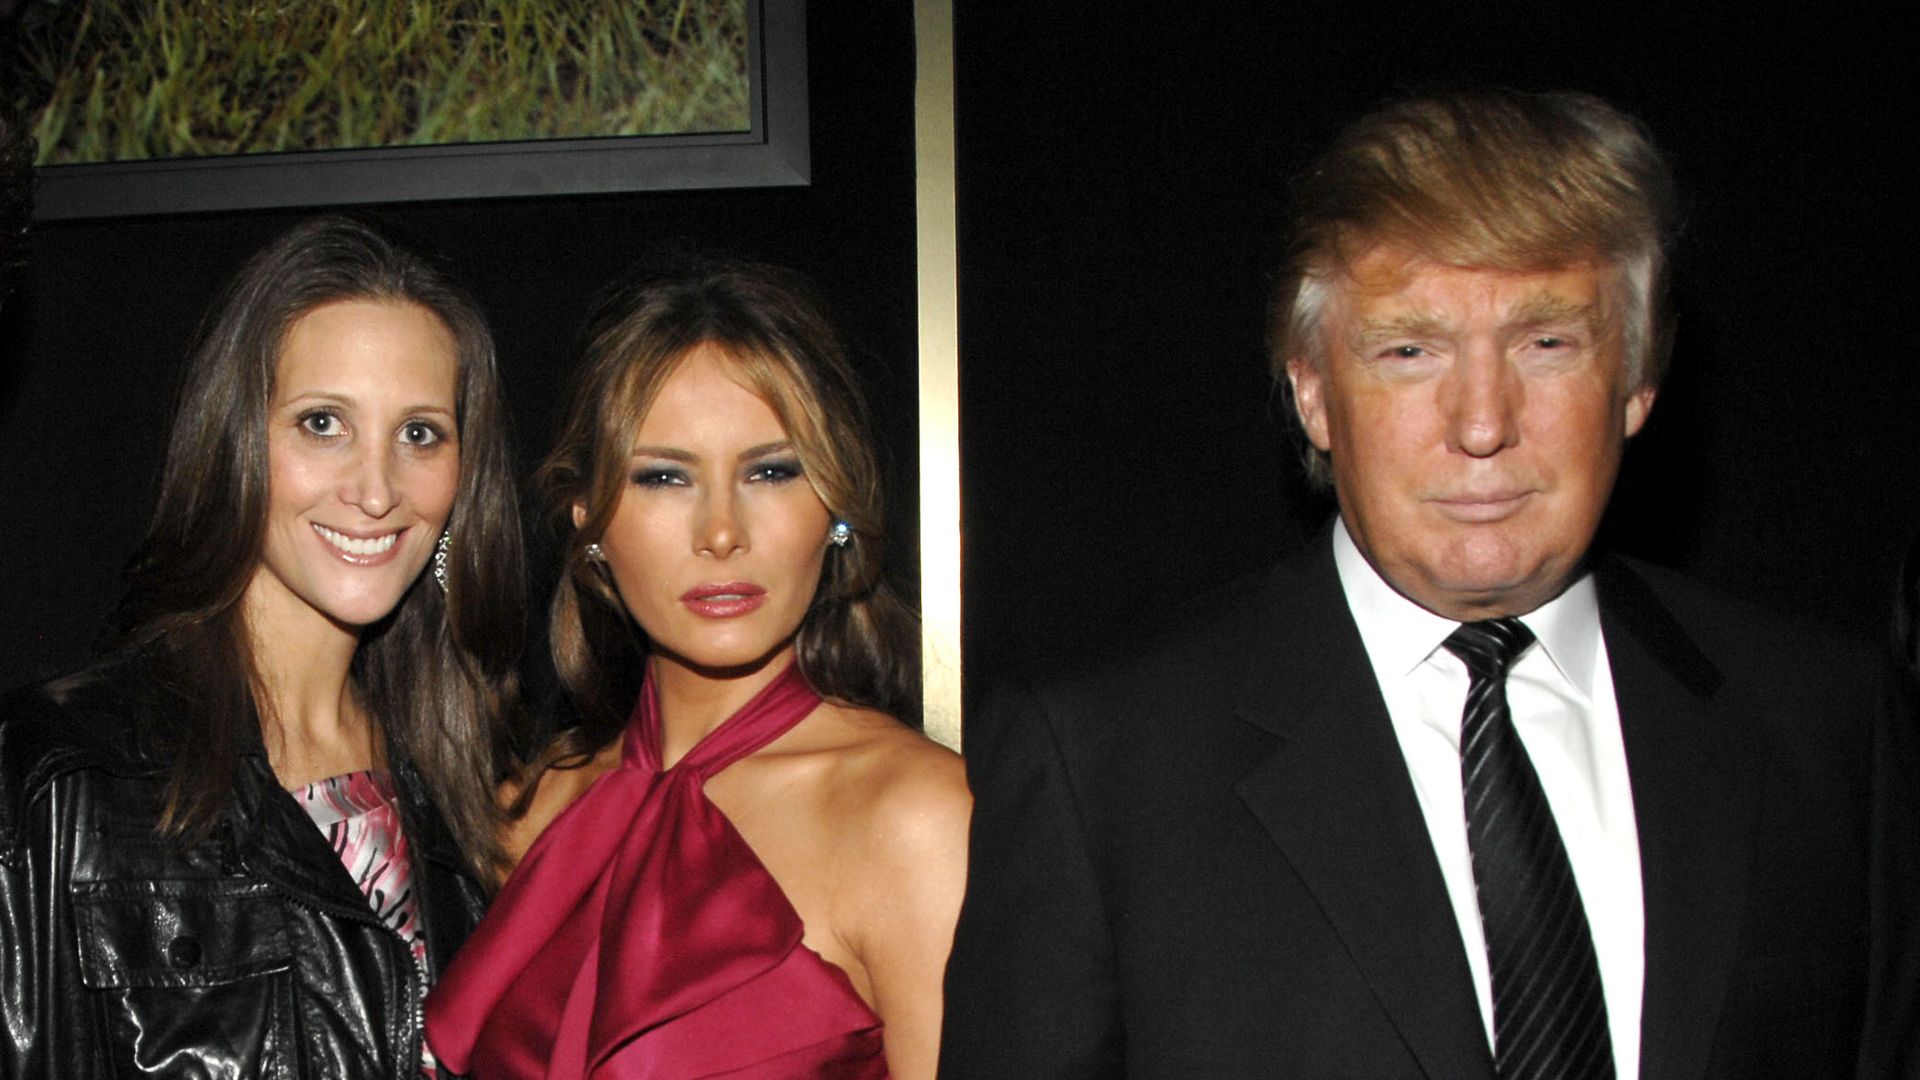 Stephanie Winston Wolkoff, Melania Trump and Donald Trump at a 2008 event.